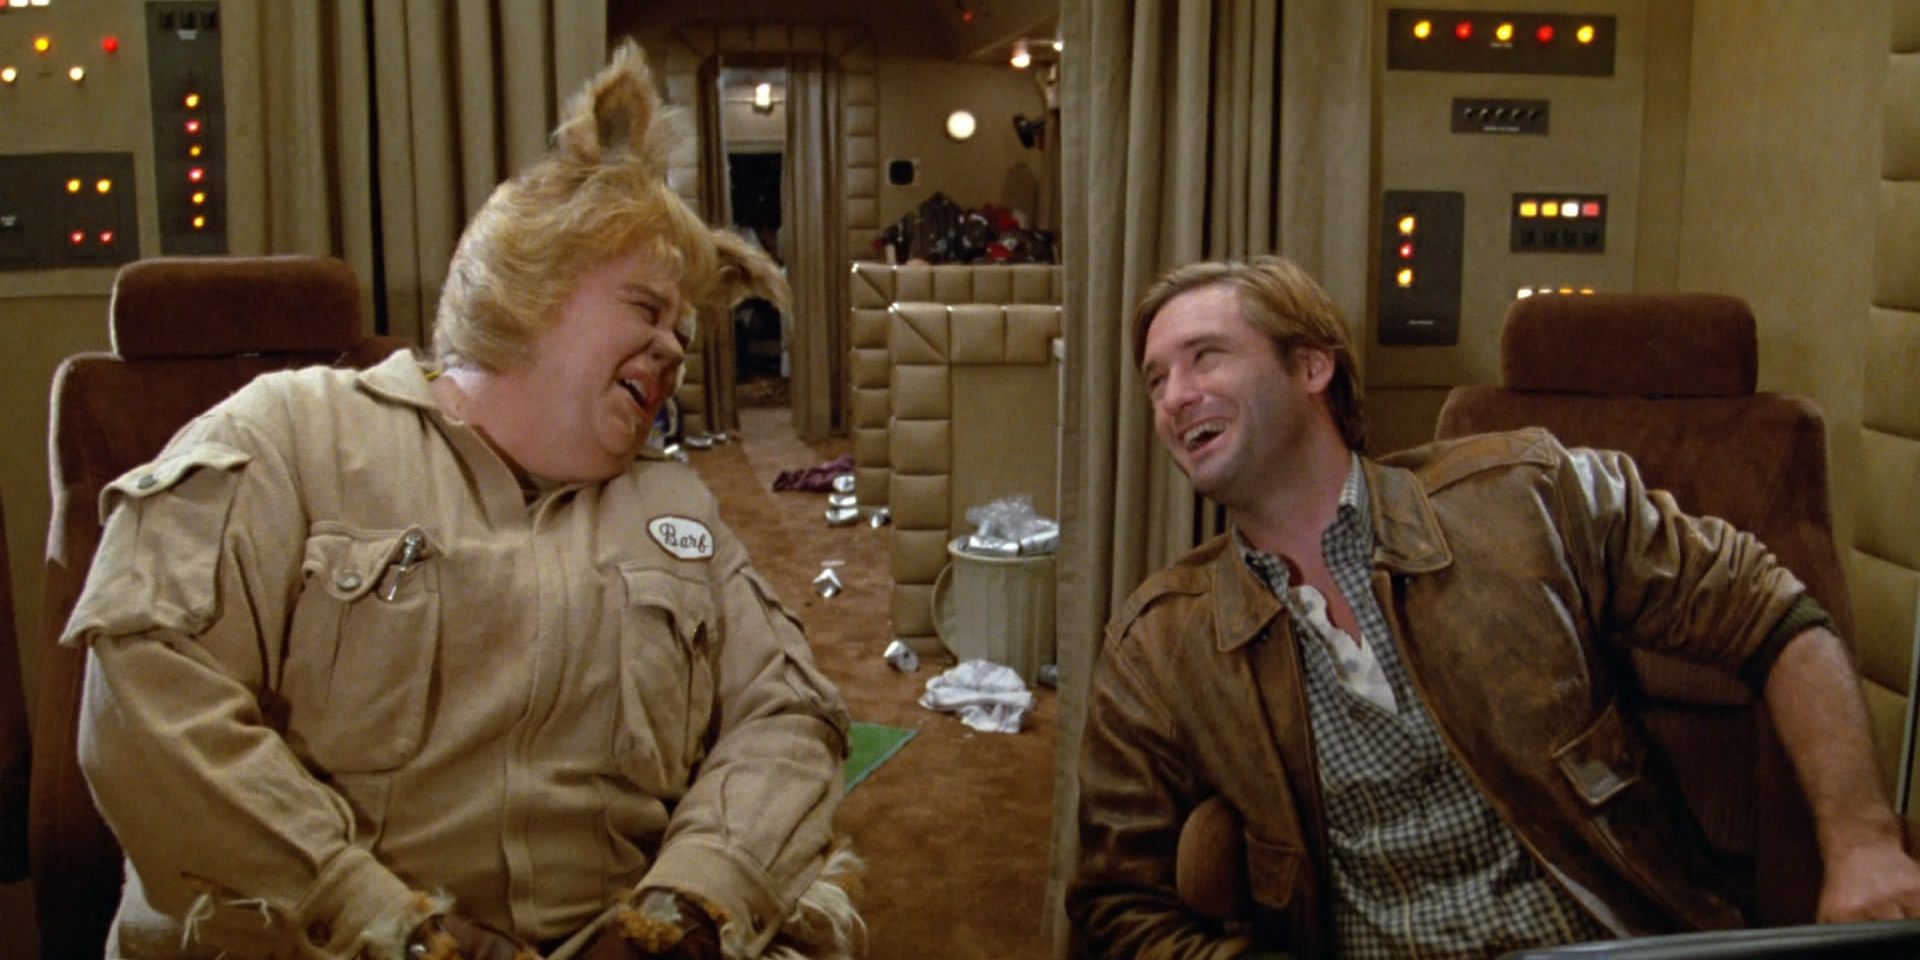 Lone Starr and Barf smiling together in the cockpit in Spaceballs